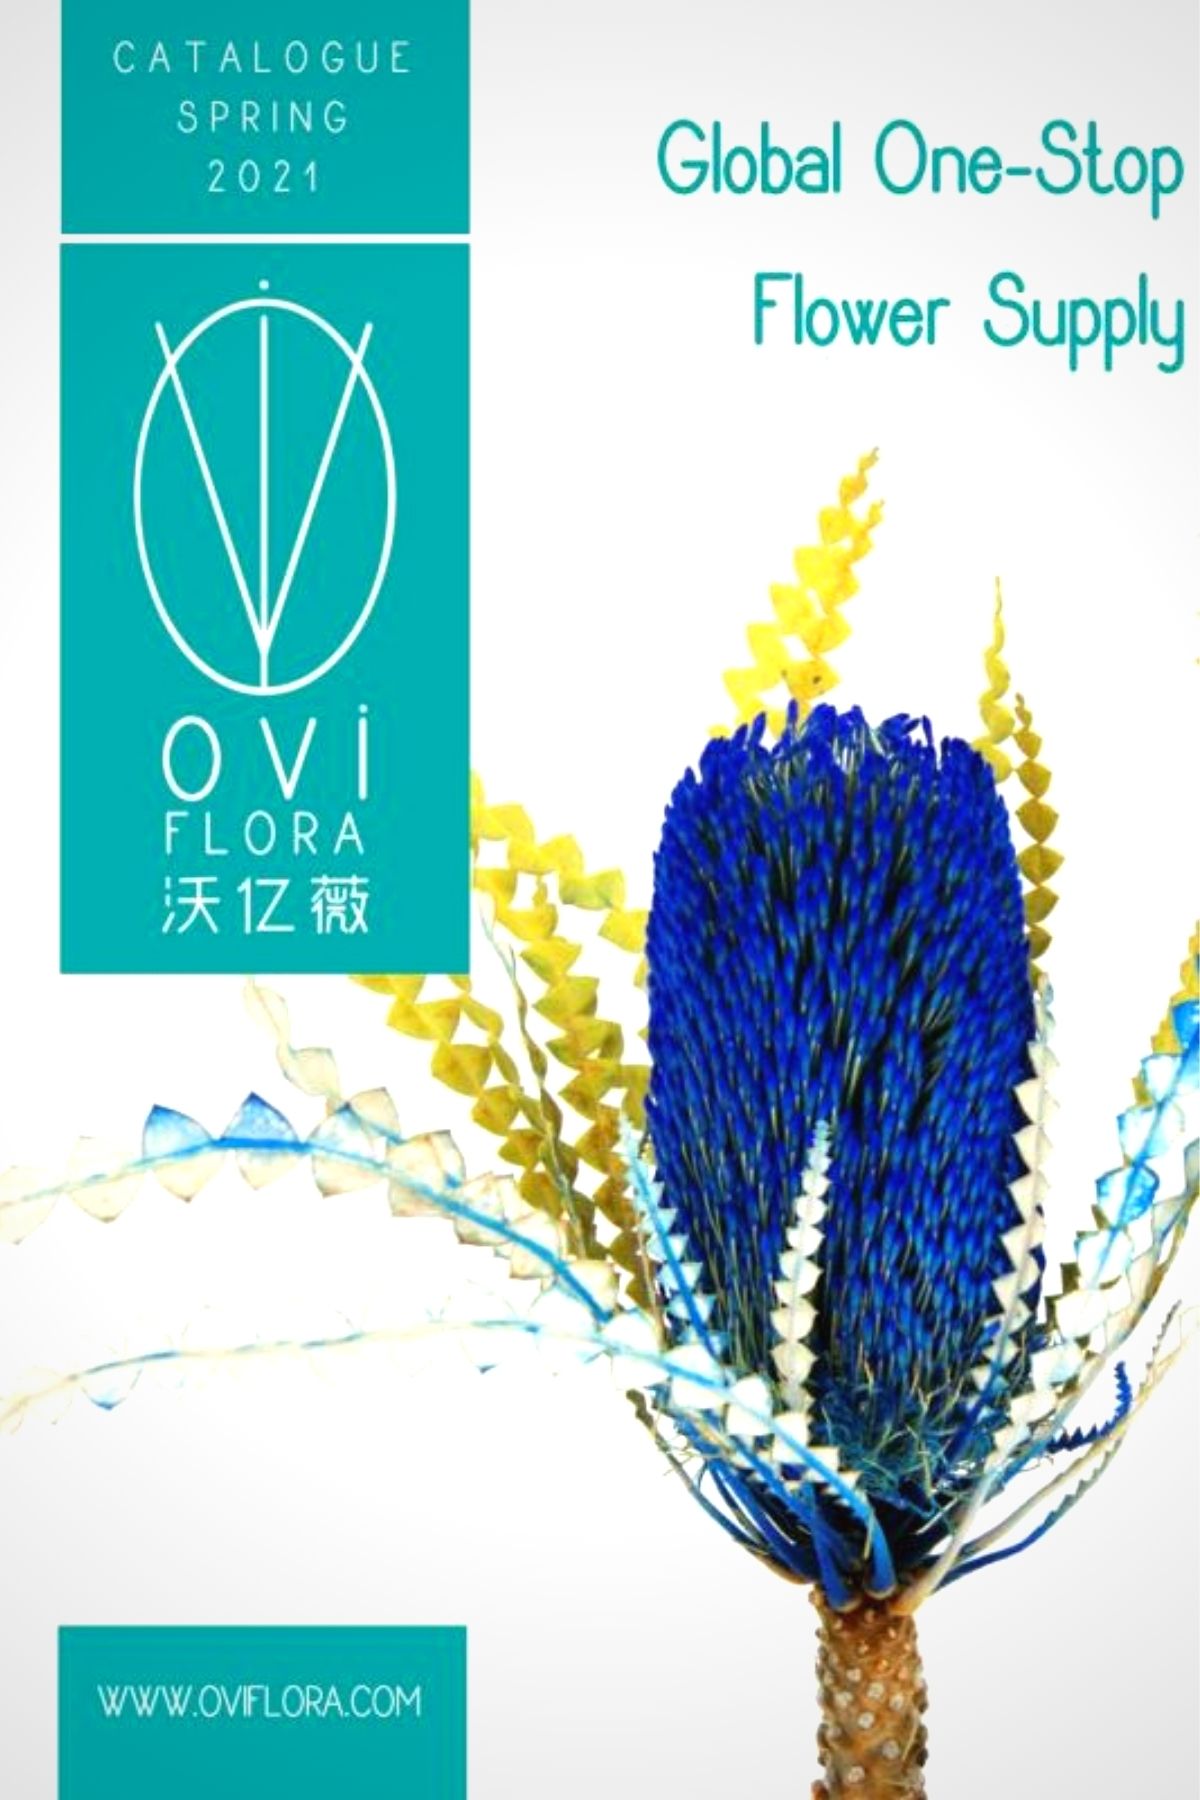 OVIflora Has a Huge Demand for Preserved and Dried Flowers in China - Article on Thursd (2)